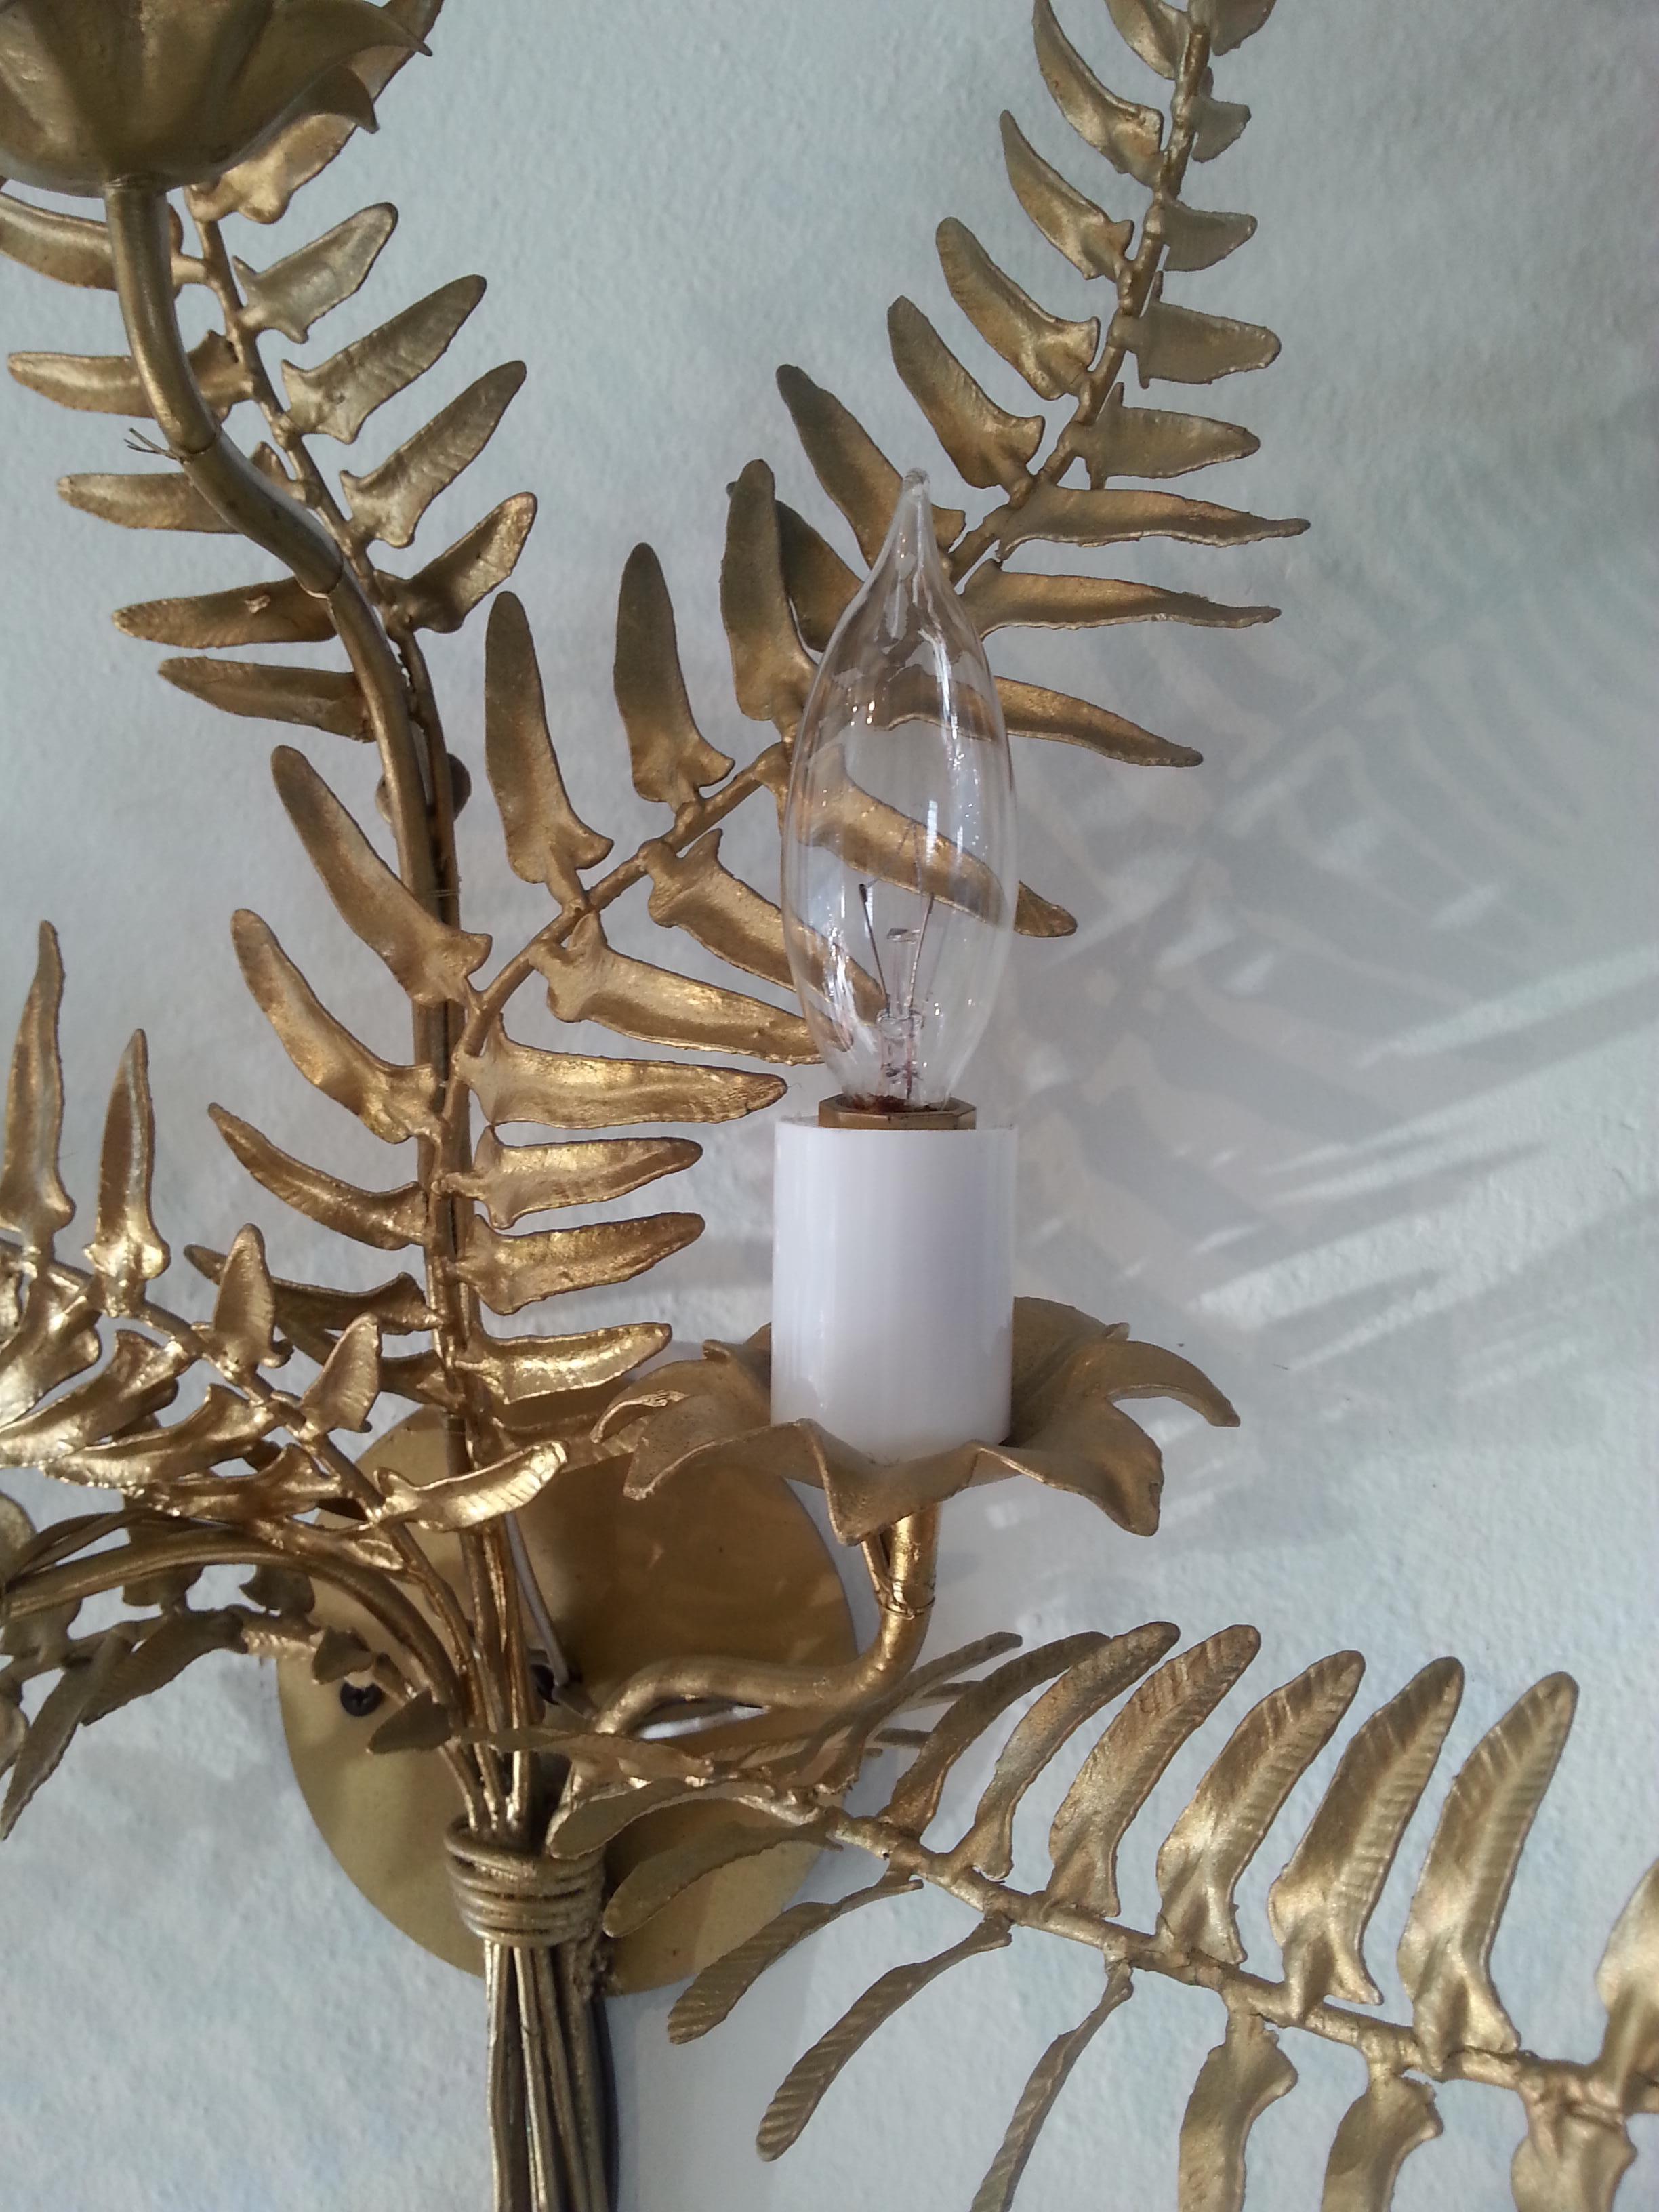 This stylish and chic pair of wall scones with their gold finished fern fronds will make a definite statement. Each sconces varies in height and width for a more naturalistic look.

Note: Dimensions of one sconce is 27